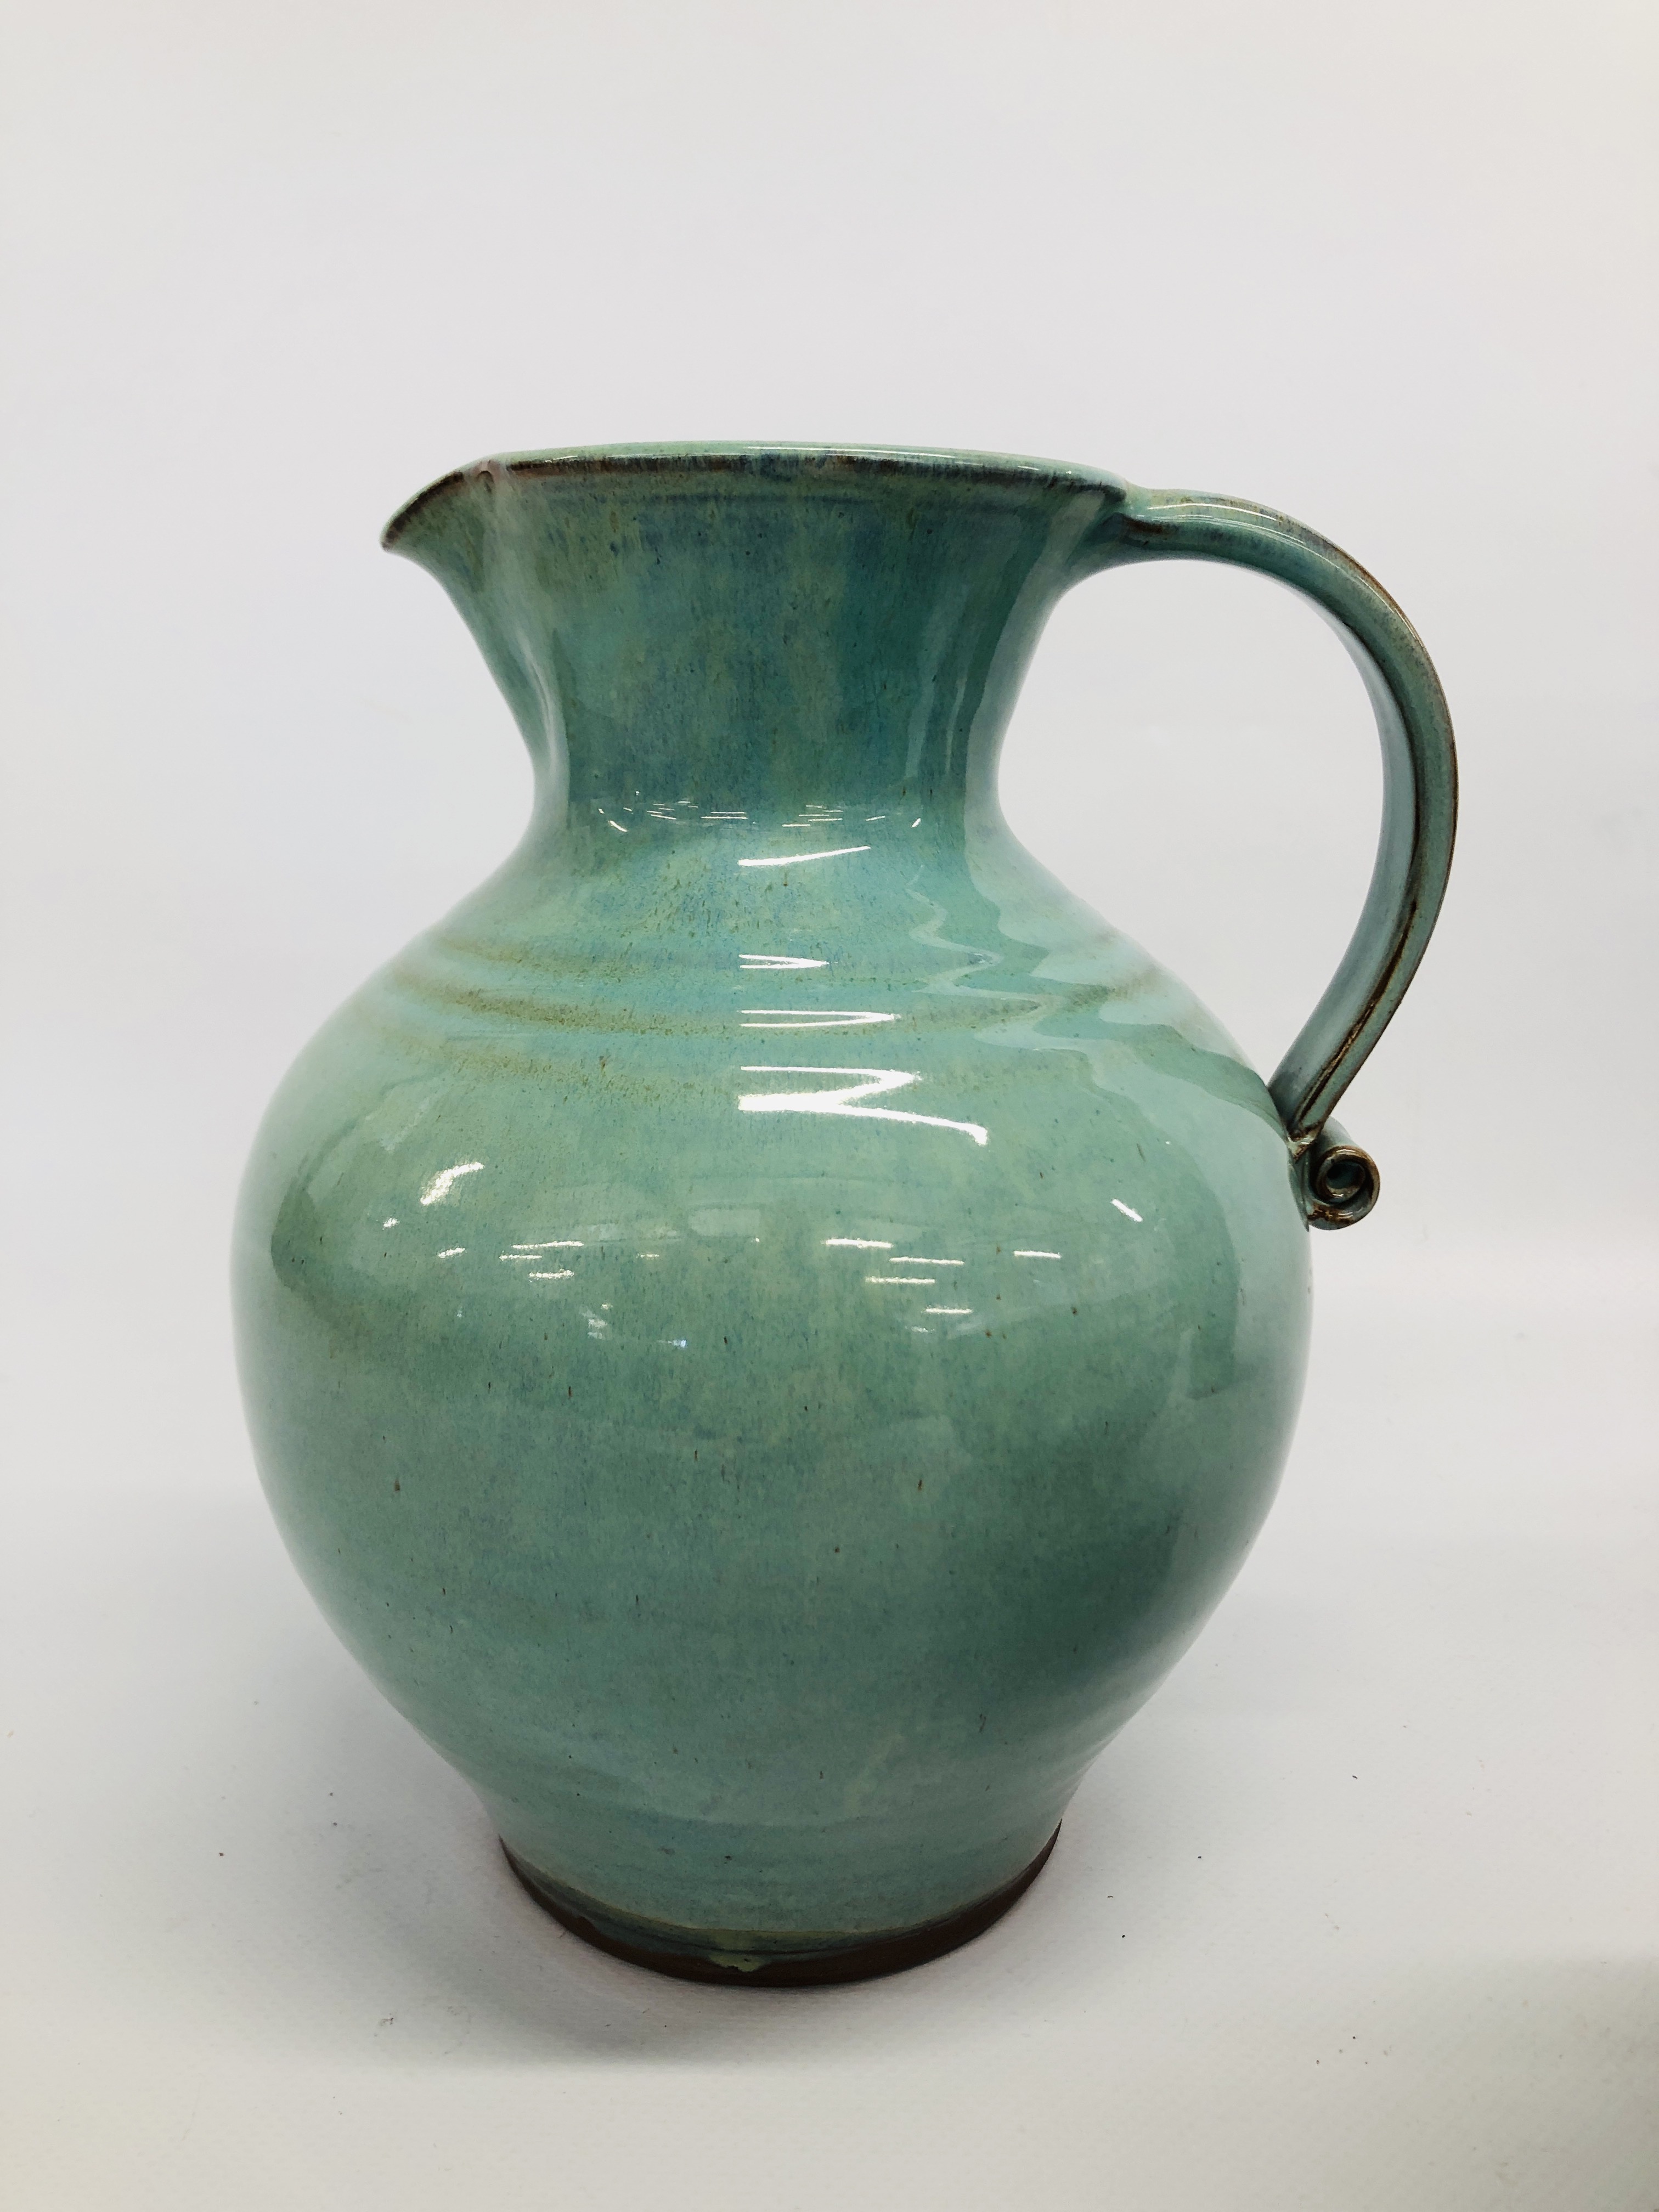 BOLINGEY STUDIO POTTERY JUG WITH SCROLLED HANDLE, - Image 3 of 6